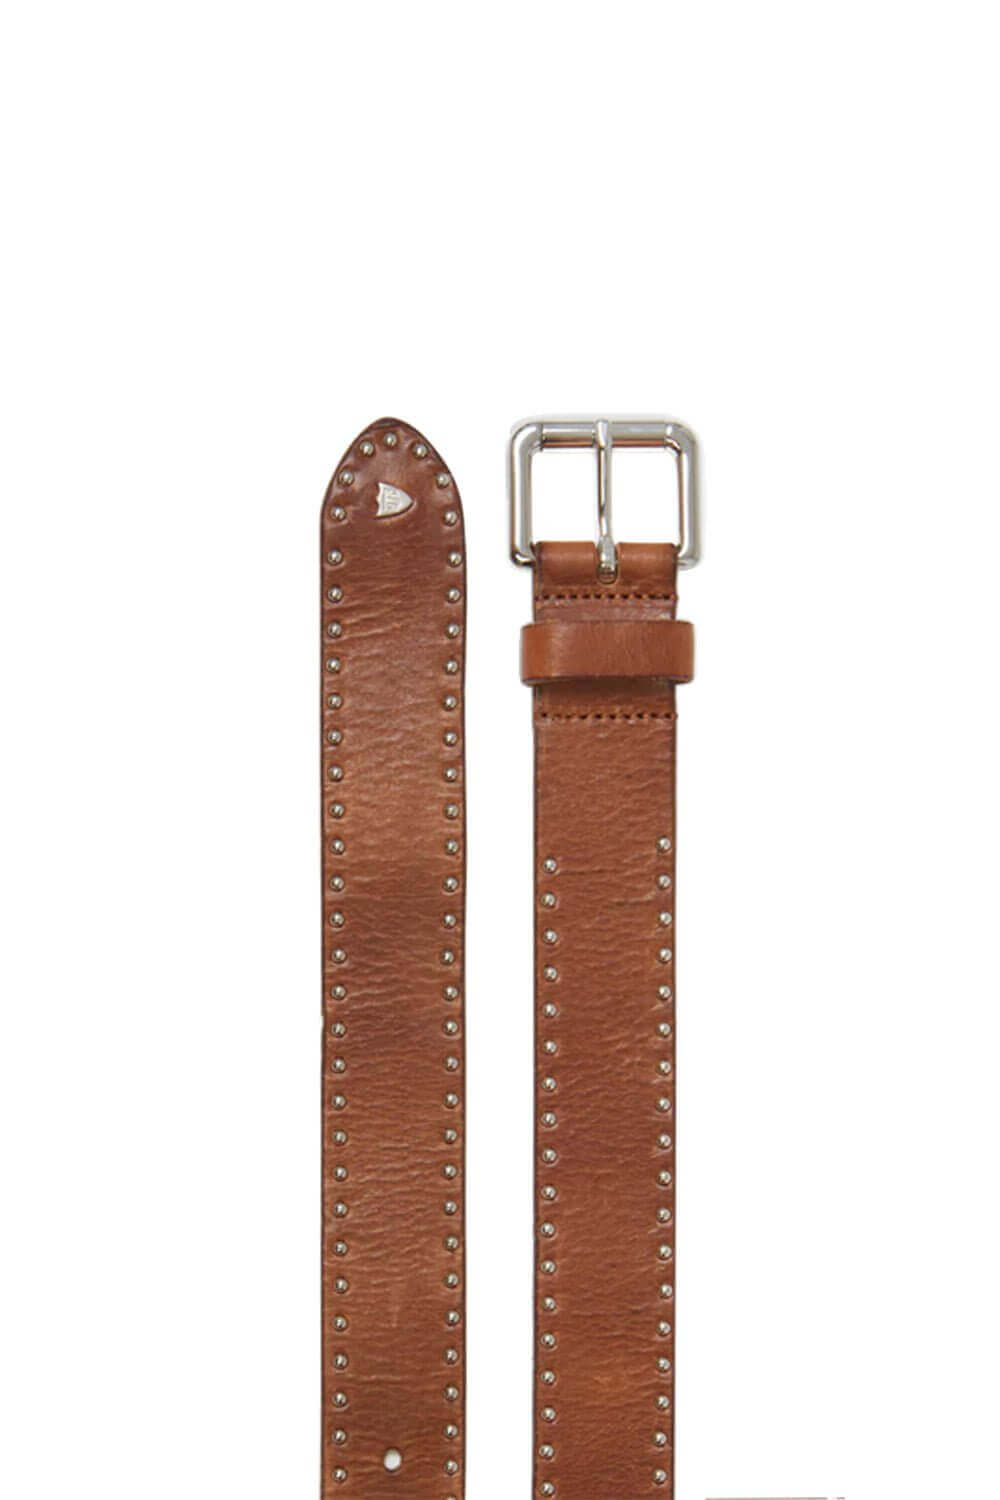 BASIC BELT Cognac leather belt, metal buckle, decorated with studs. Height: 3 cm. Made in Italy HTC LOS ANGELES